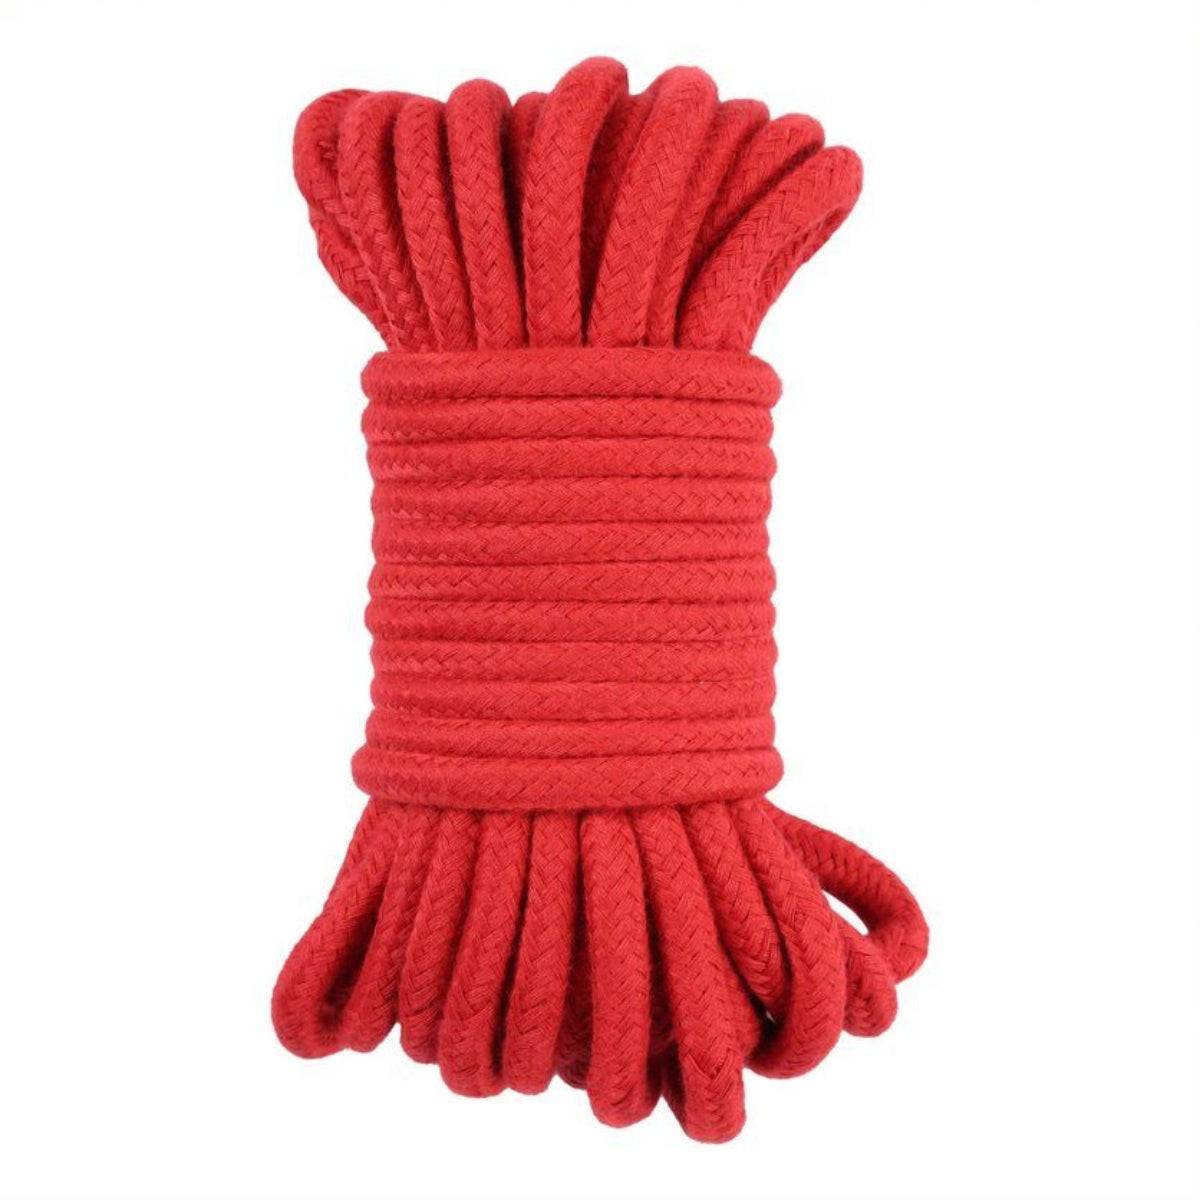 Product Image - Me You Us Tie Me Up Soft Cotton Rope Red 10m - Simply Pleasure